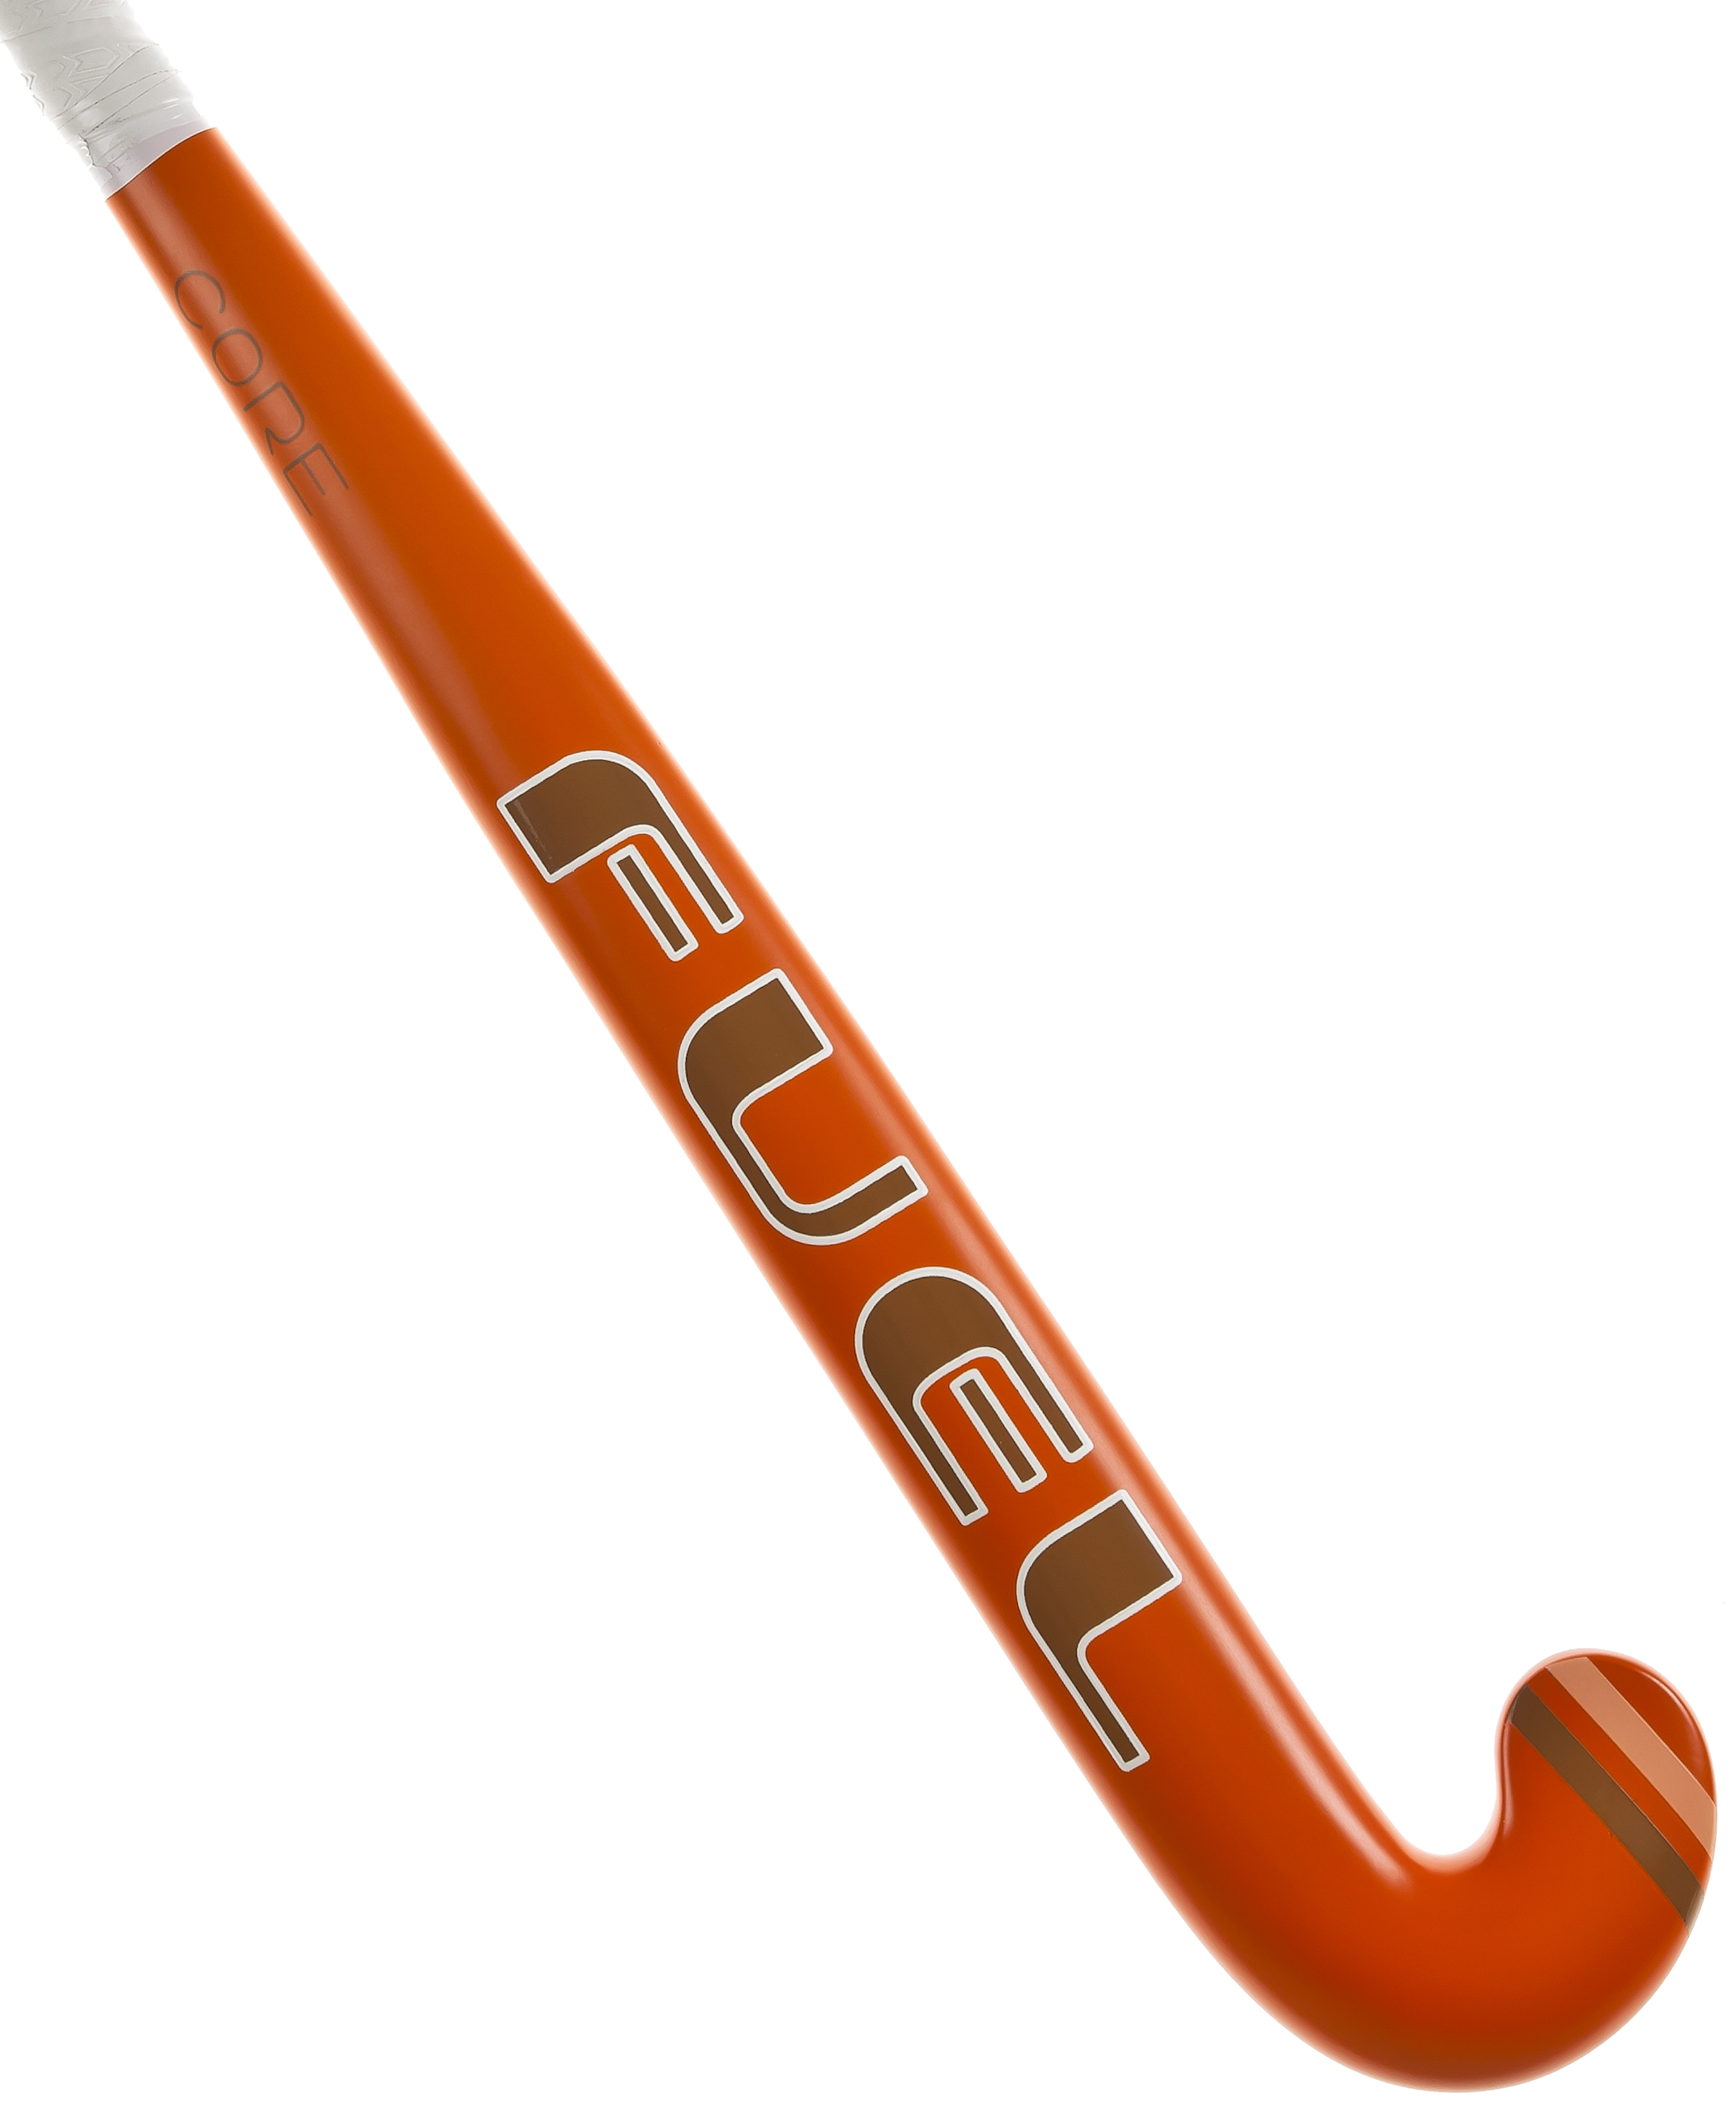 Download Png Image   Hockey Stick Free Png Image - Hockey Stick, Transparent background PNG HD thumbnail